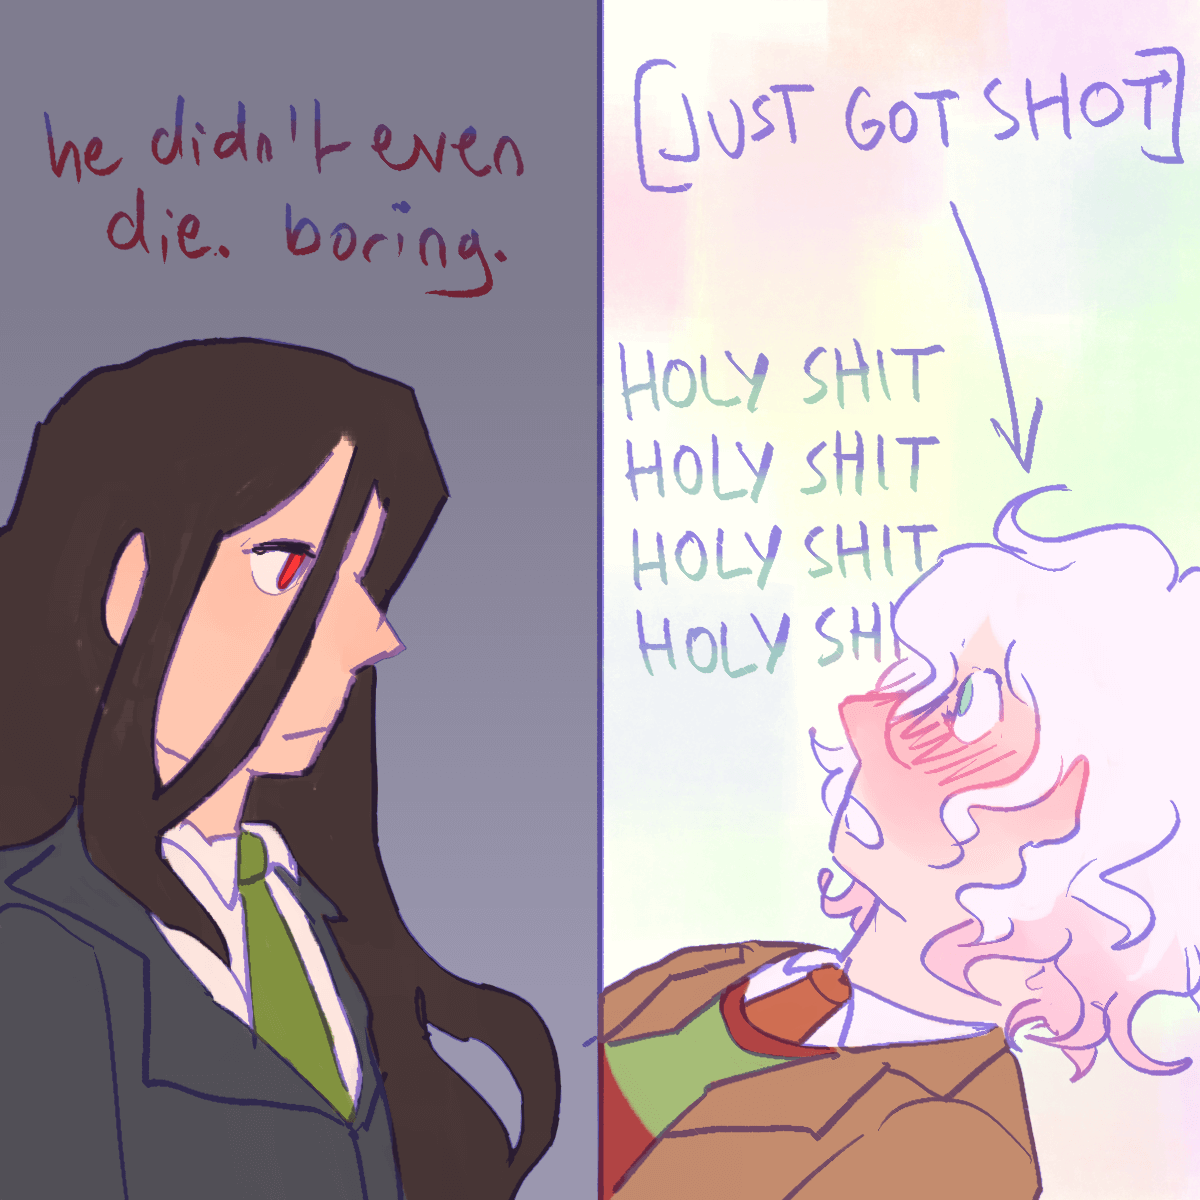 a drawing of izuru and nagito in a scene from danganronpa 3. izuru is looking
		downward with the thought 'he didn't even die. boring.' nagito is lying on the ground blushing with a pastel colored 
		background thinking 'holy shit holy shit holy shit holy shit' with an arrow and the caption 'just got shot'.